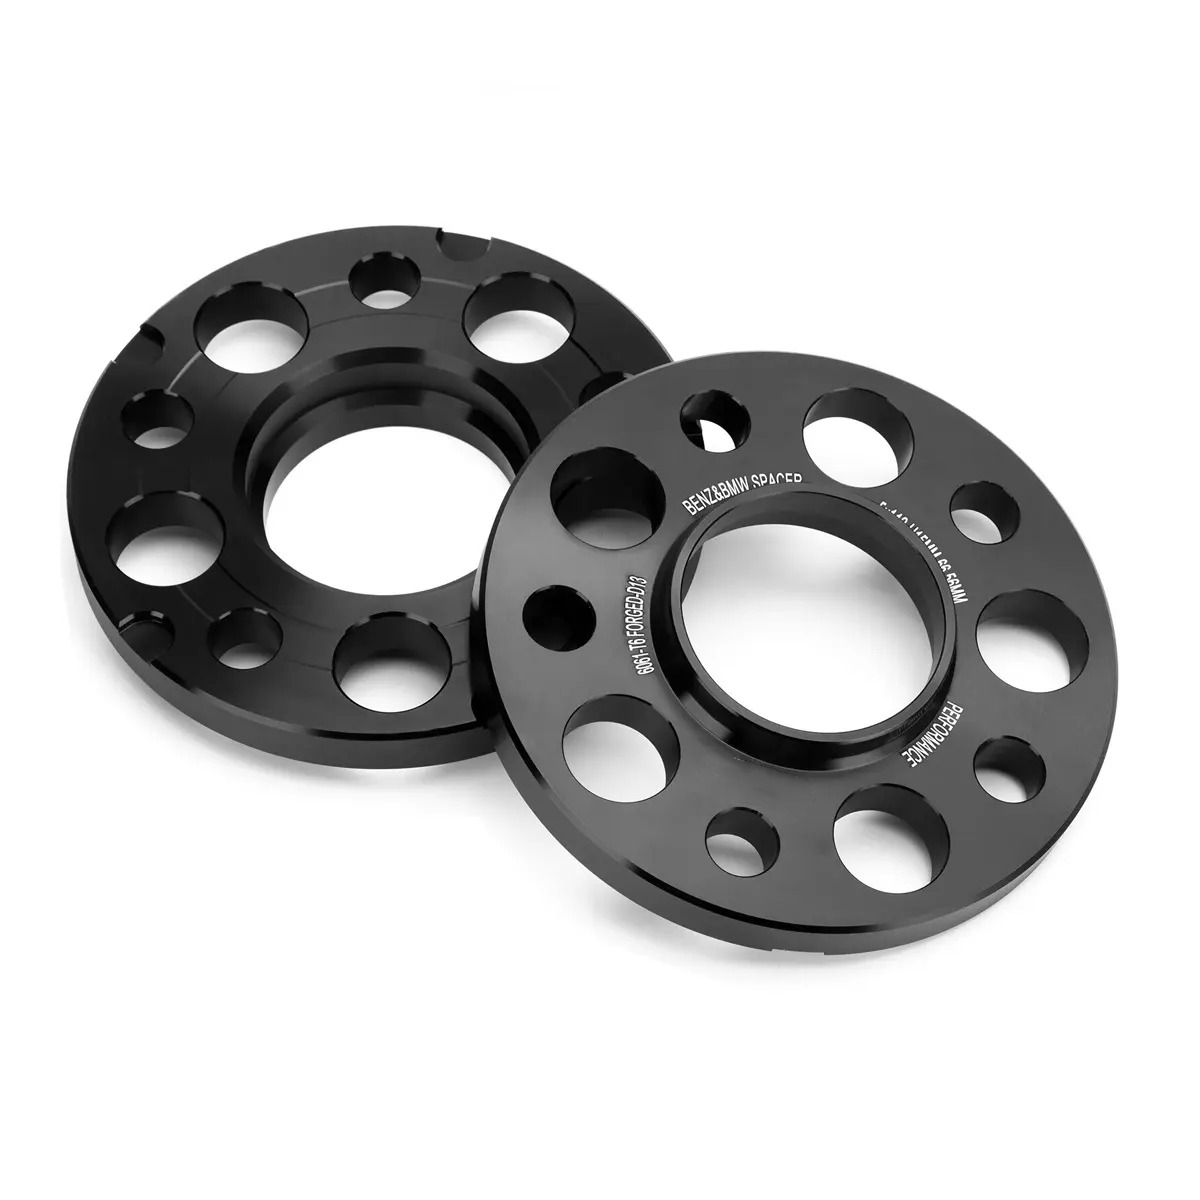 15mm Hubcentric Wheel Spacers | 5x112 | 66.6 / 66.56 Bore | for Mercedes Benz